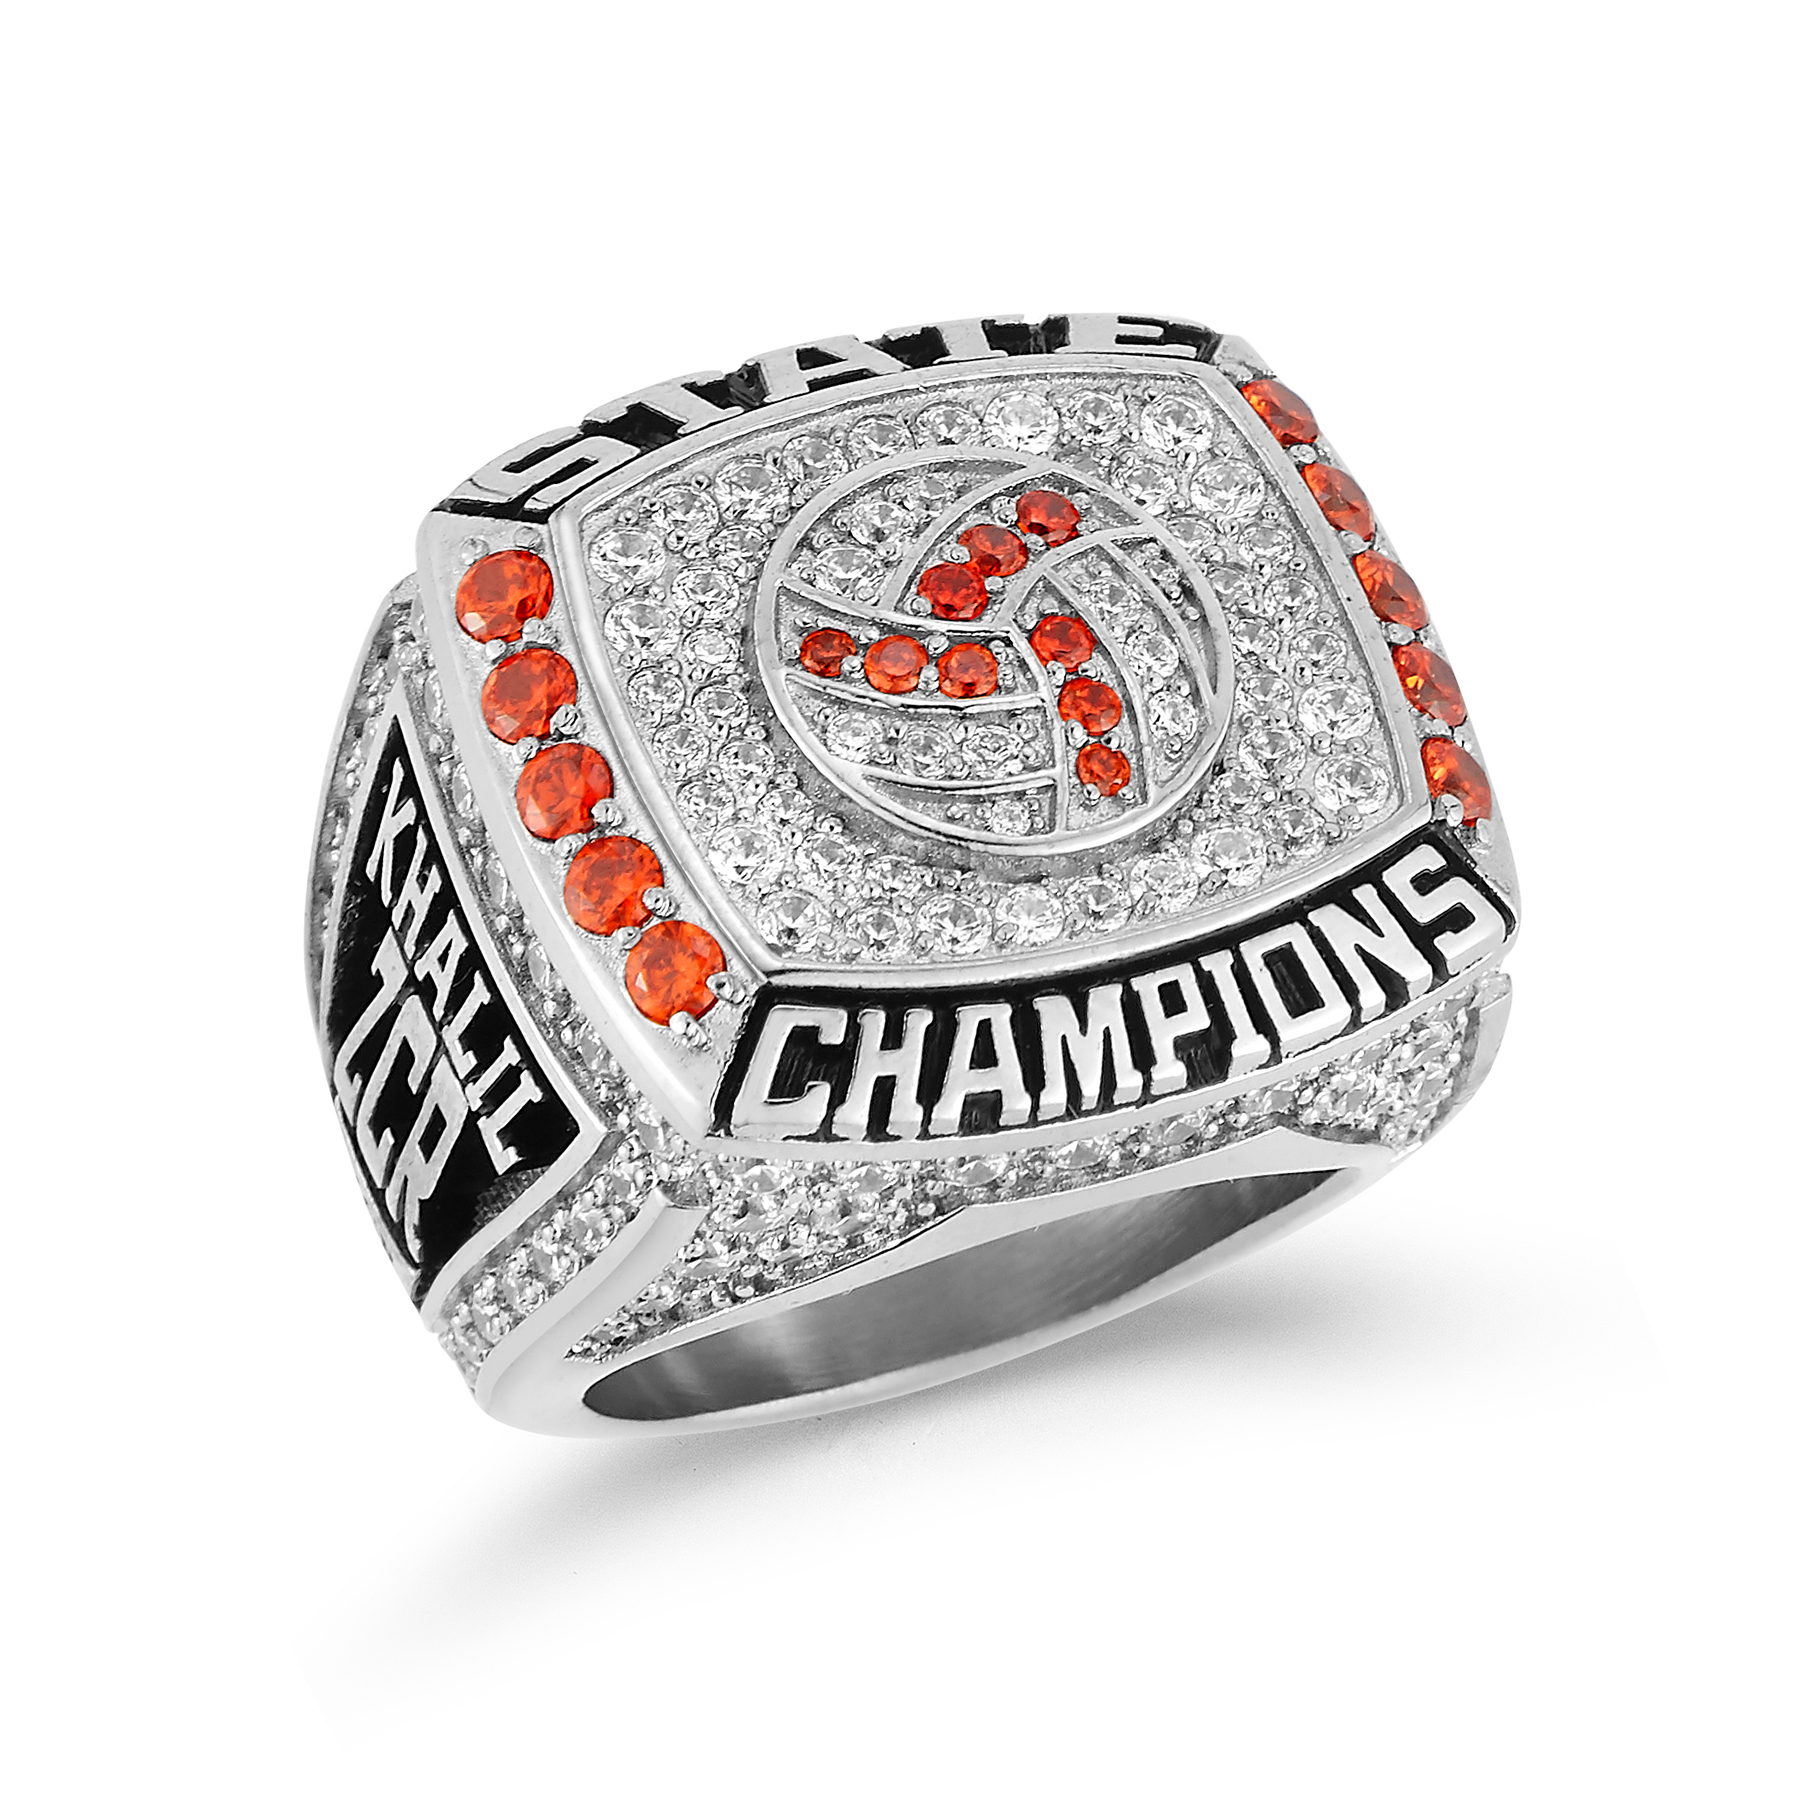 Category Page  Zolnier Championship Rings